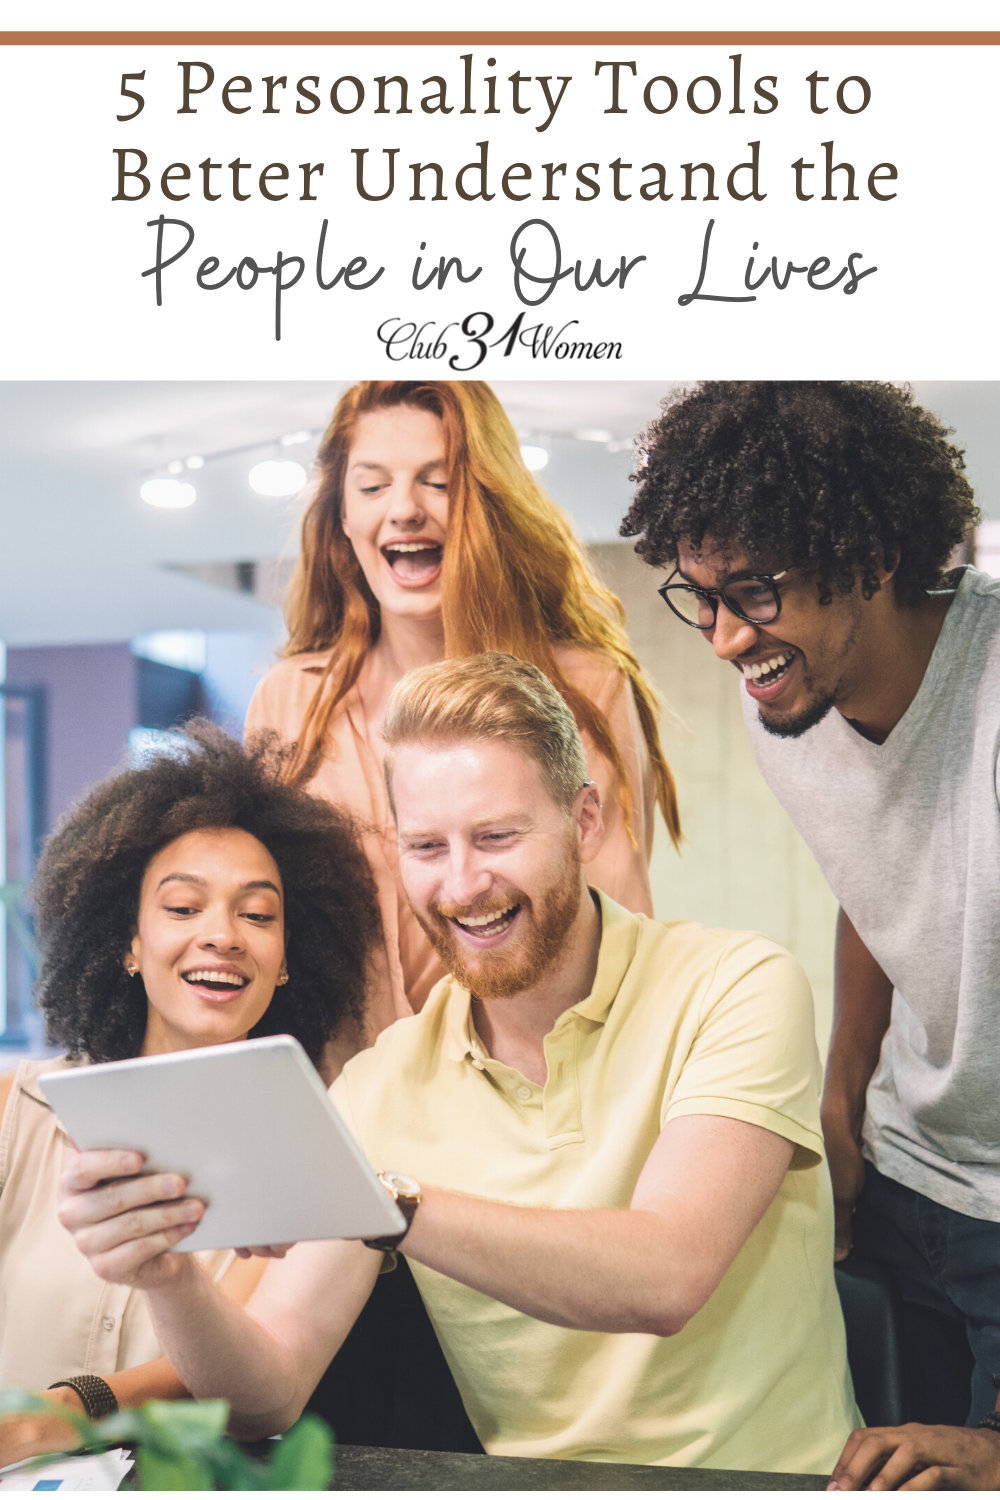 Wouldn't it be great to have some personality tools to help us better understand and interact with the people in our lives? Well, help is here! via @Club31Women